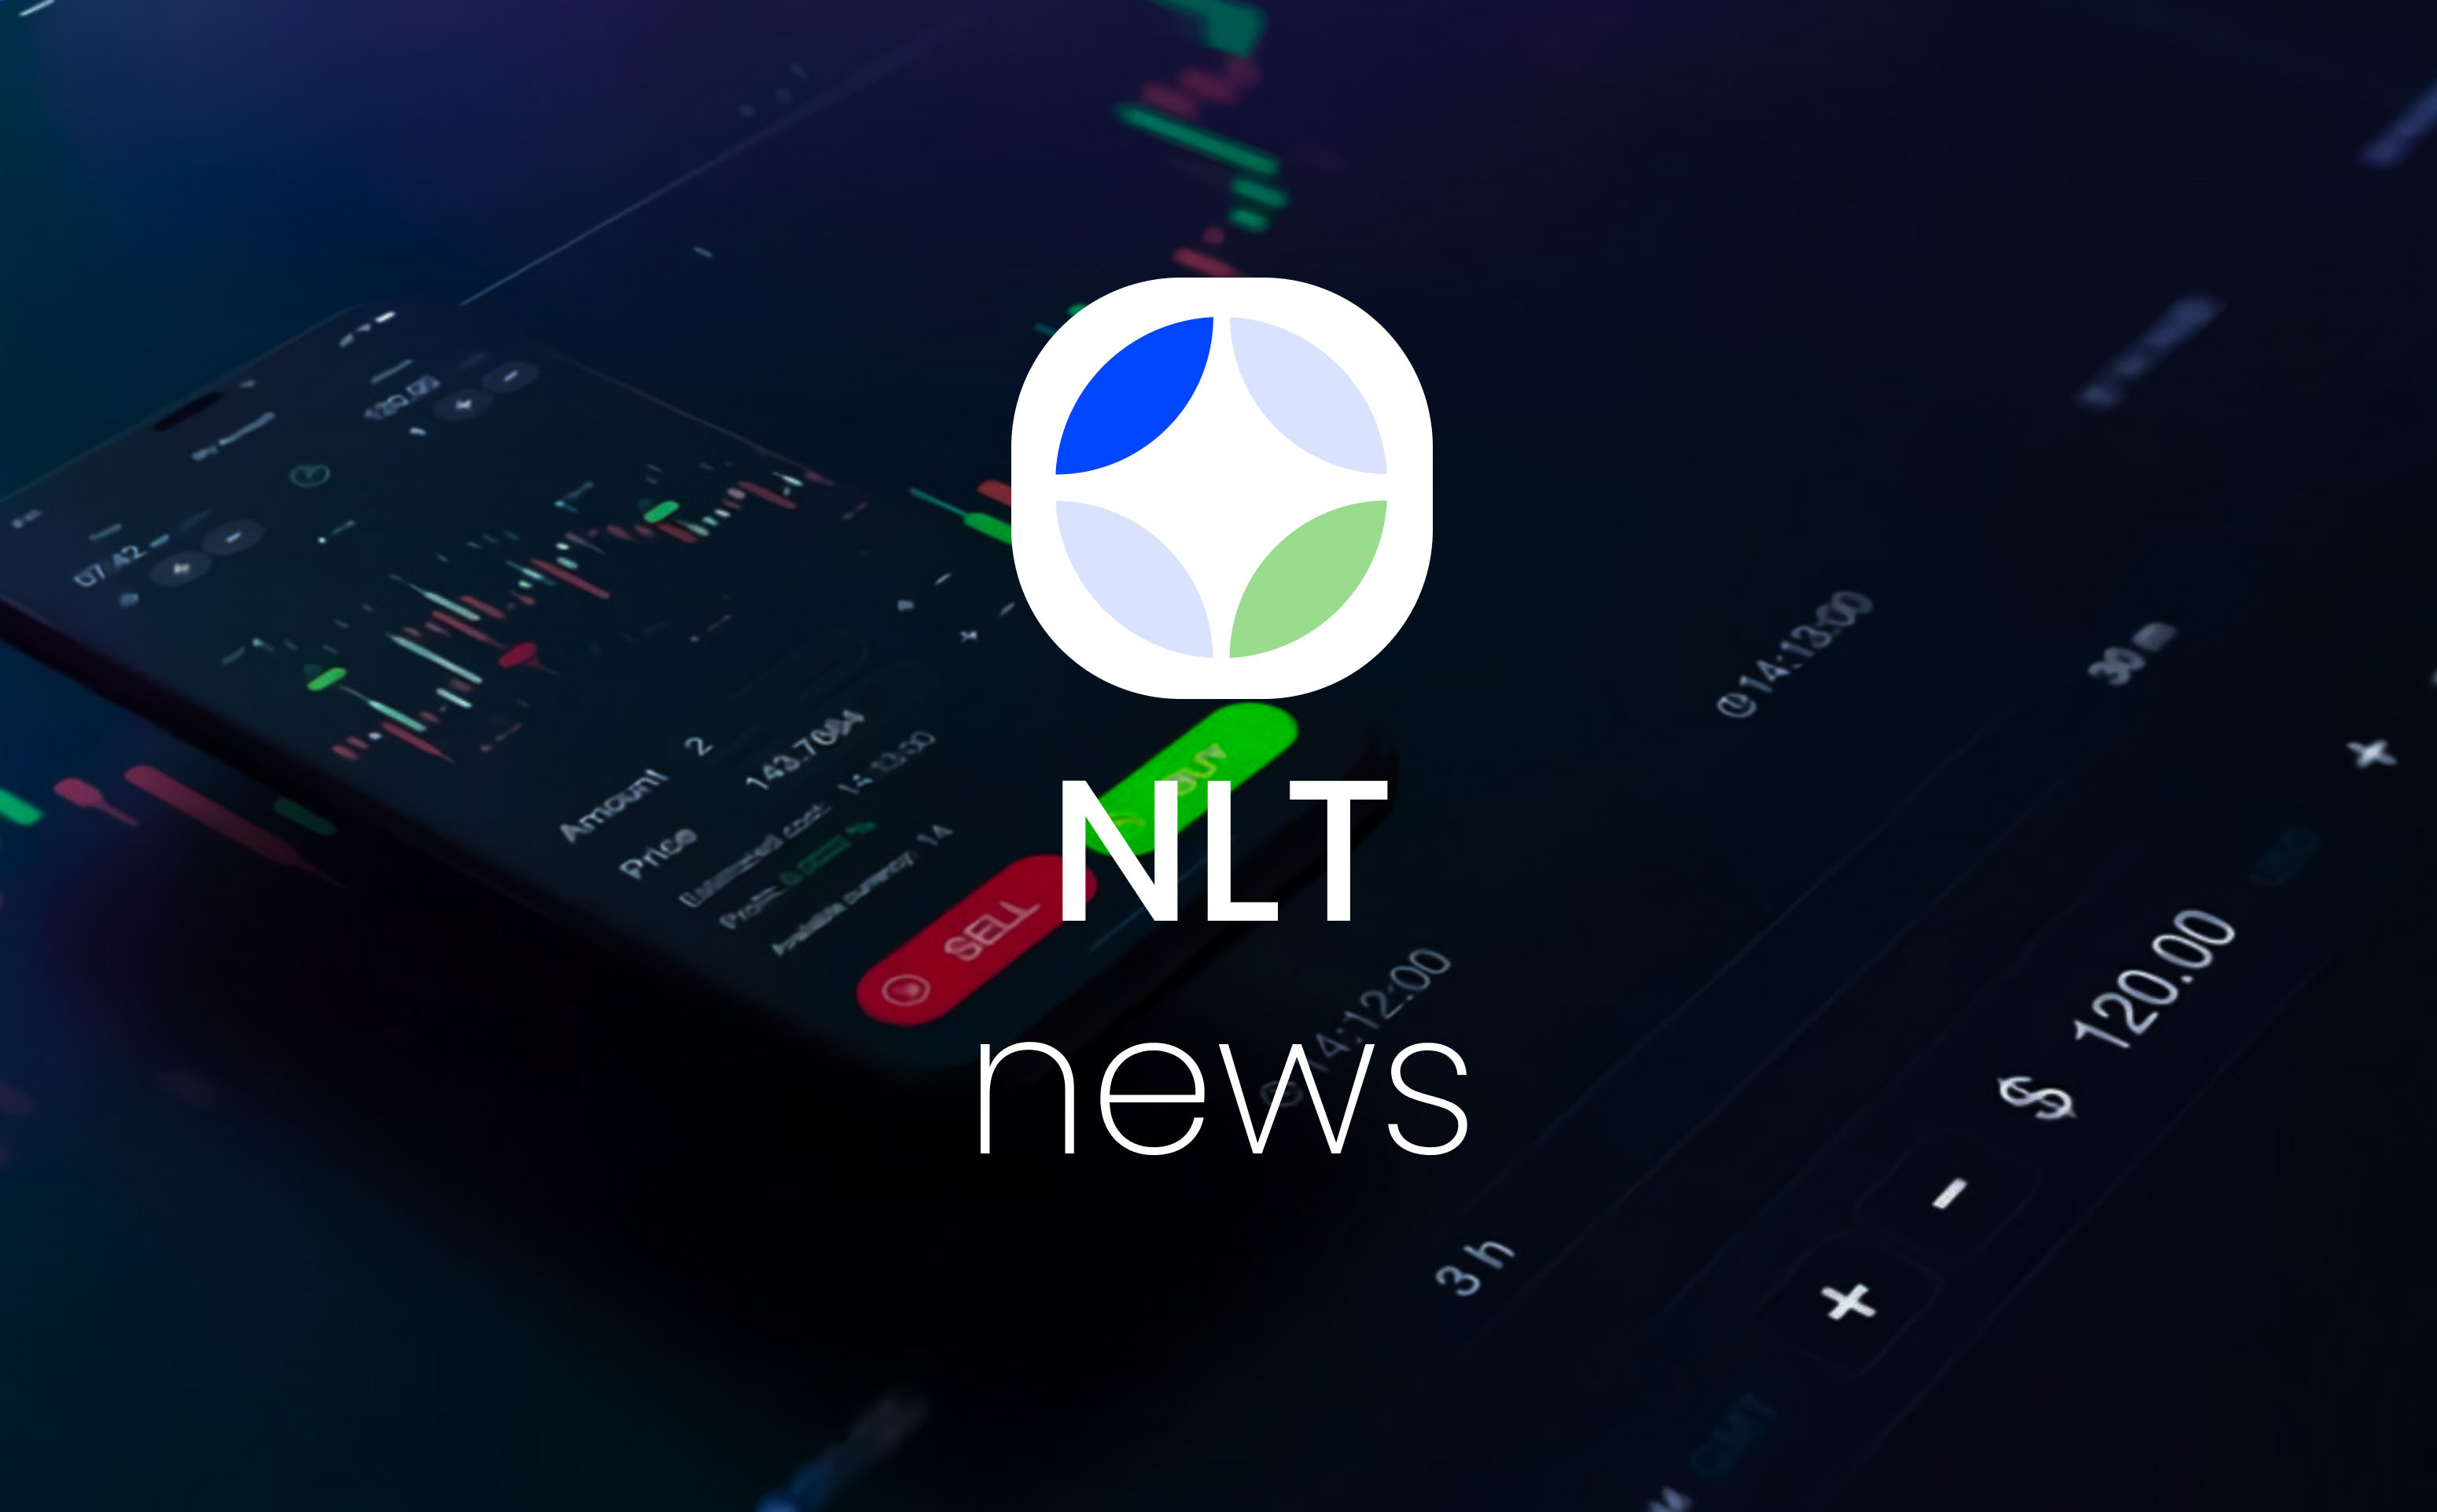 NLT introduces the latest adaptive trading algorithms that improve the efficiency of crypto trading